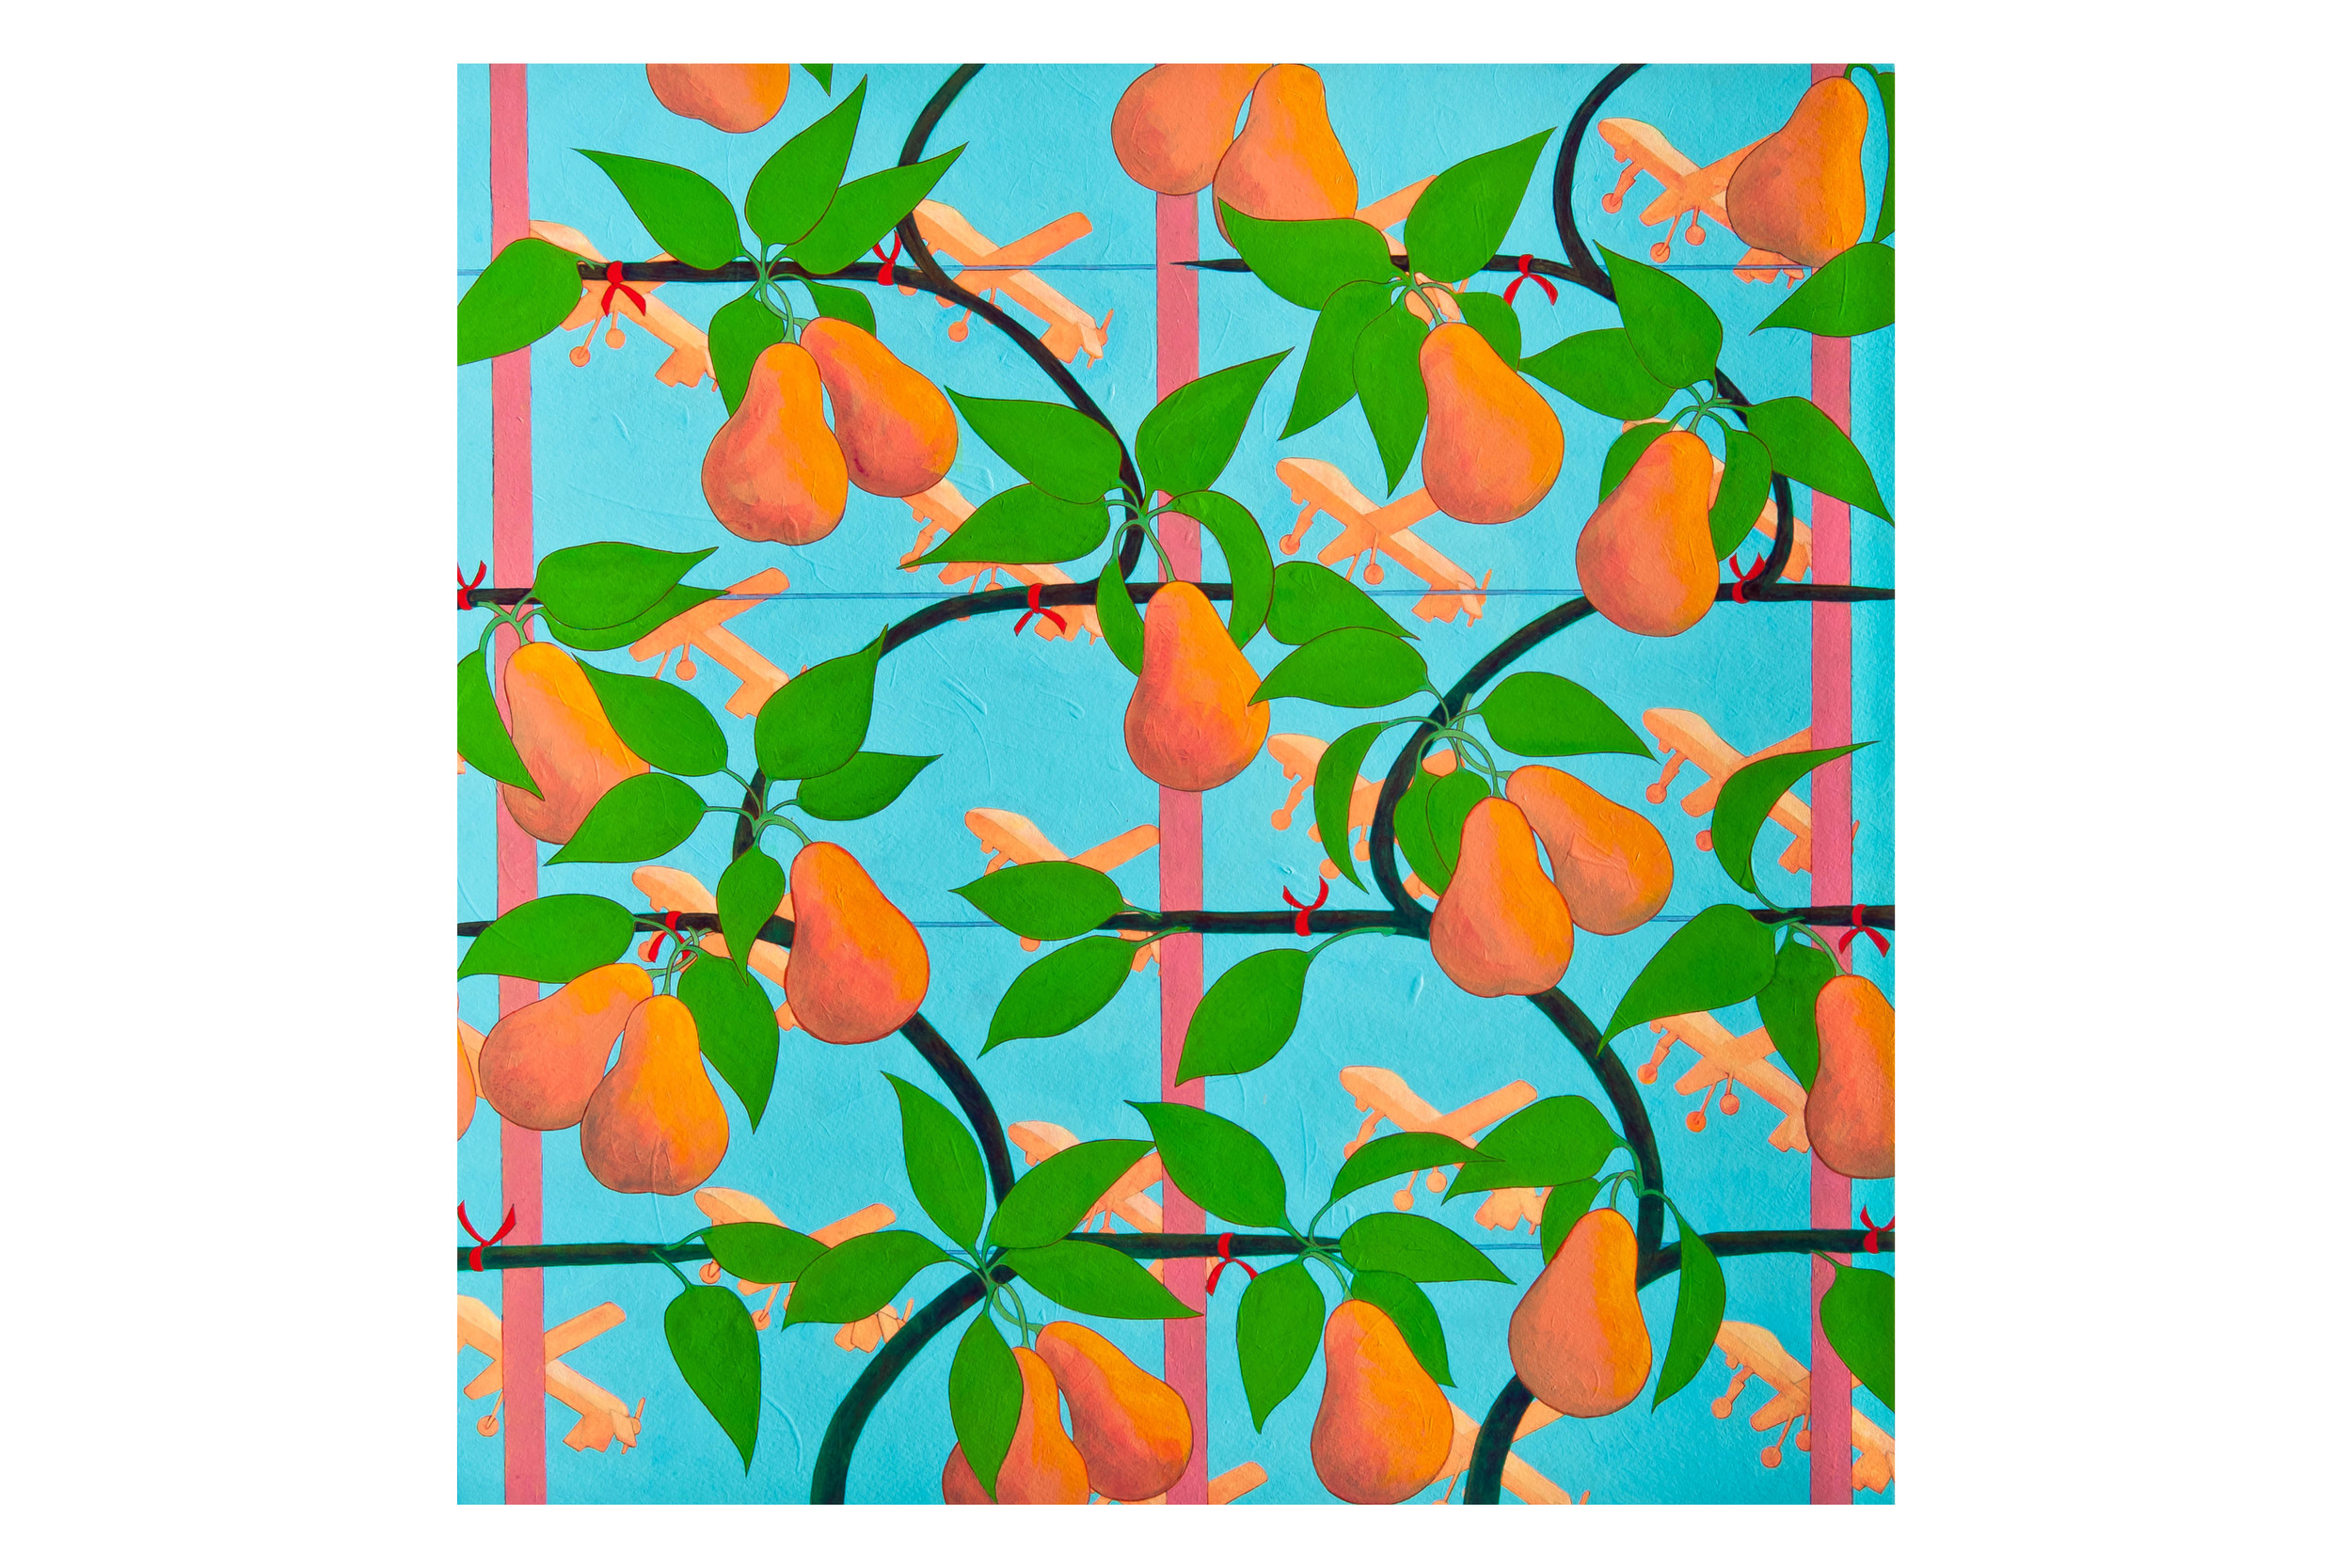   Pear Espalier with Drones  Acrylic on paper, 22” x 22”  {Sold} 